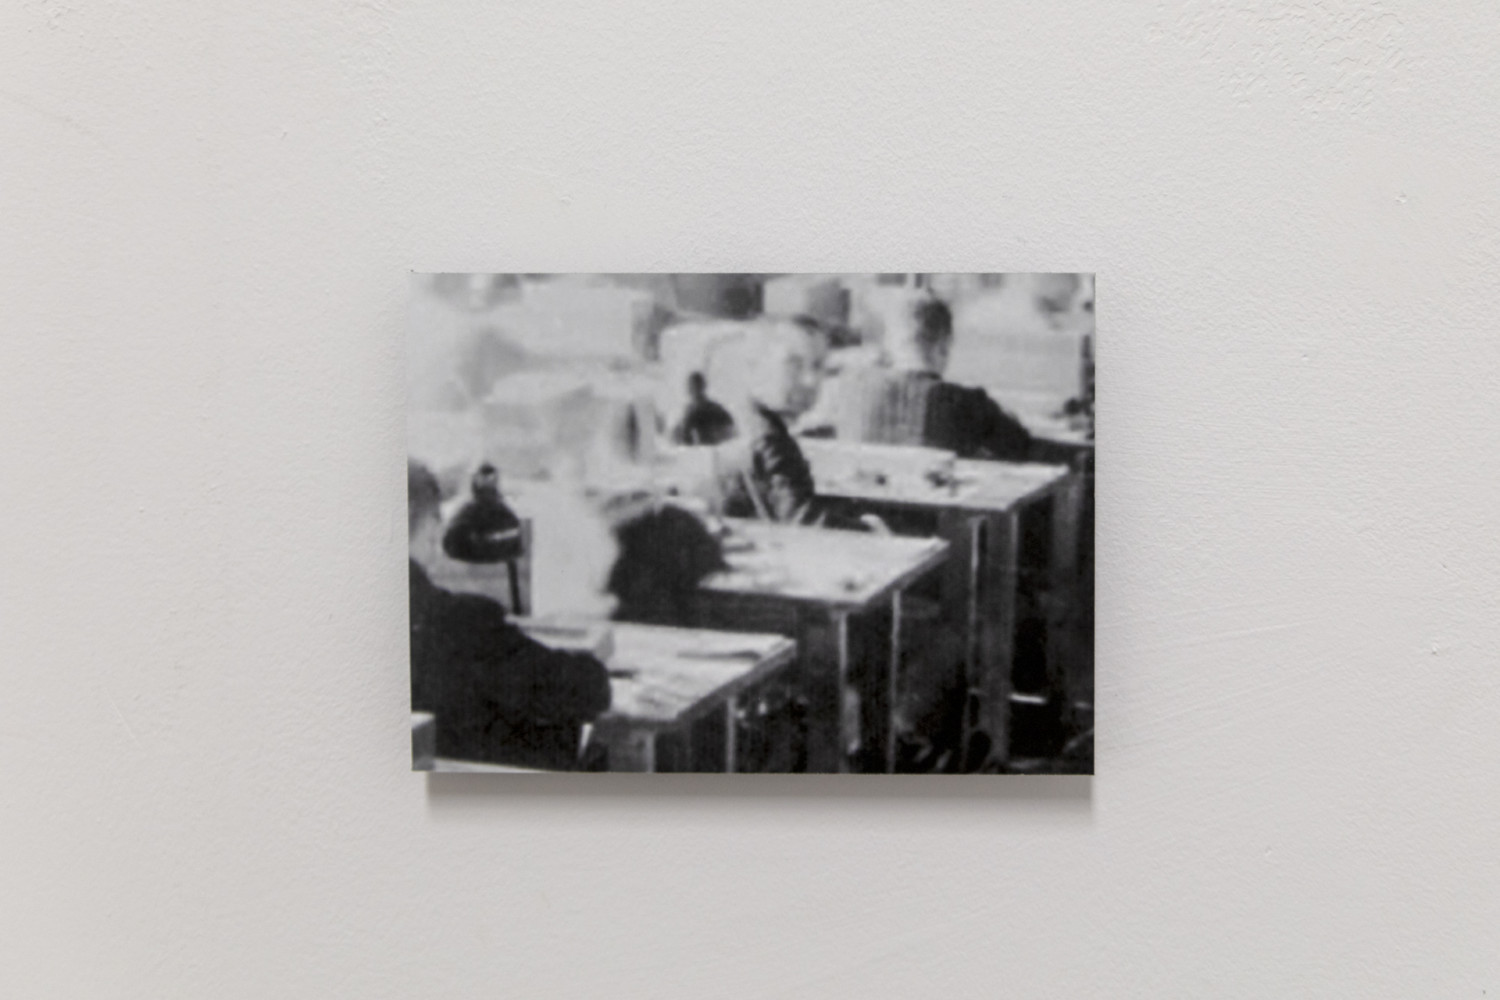 Fragment (enlargement) of a photograph taken clandestinely at the Messap workshop, Neuengamme Concentration Camp Memorial, F 1981-0114.